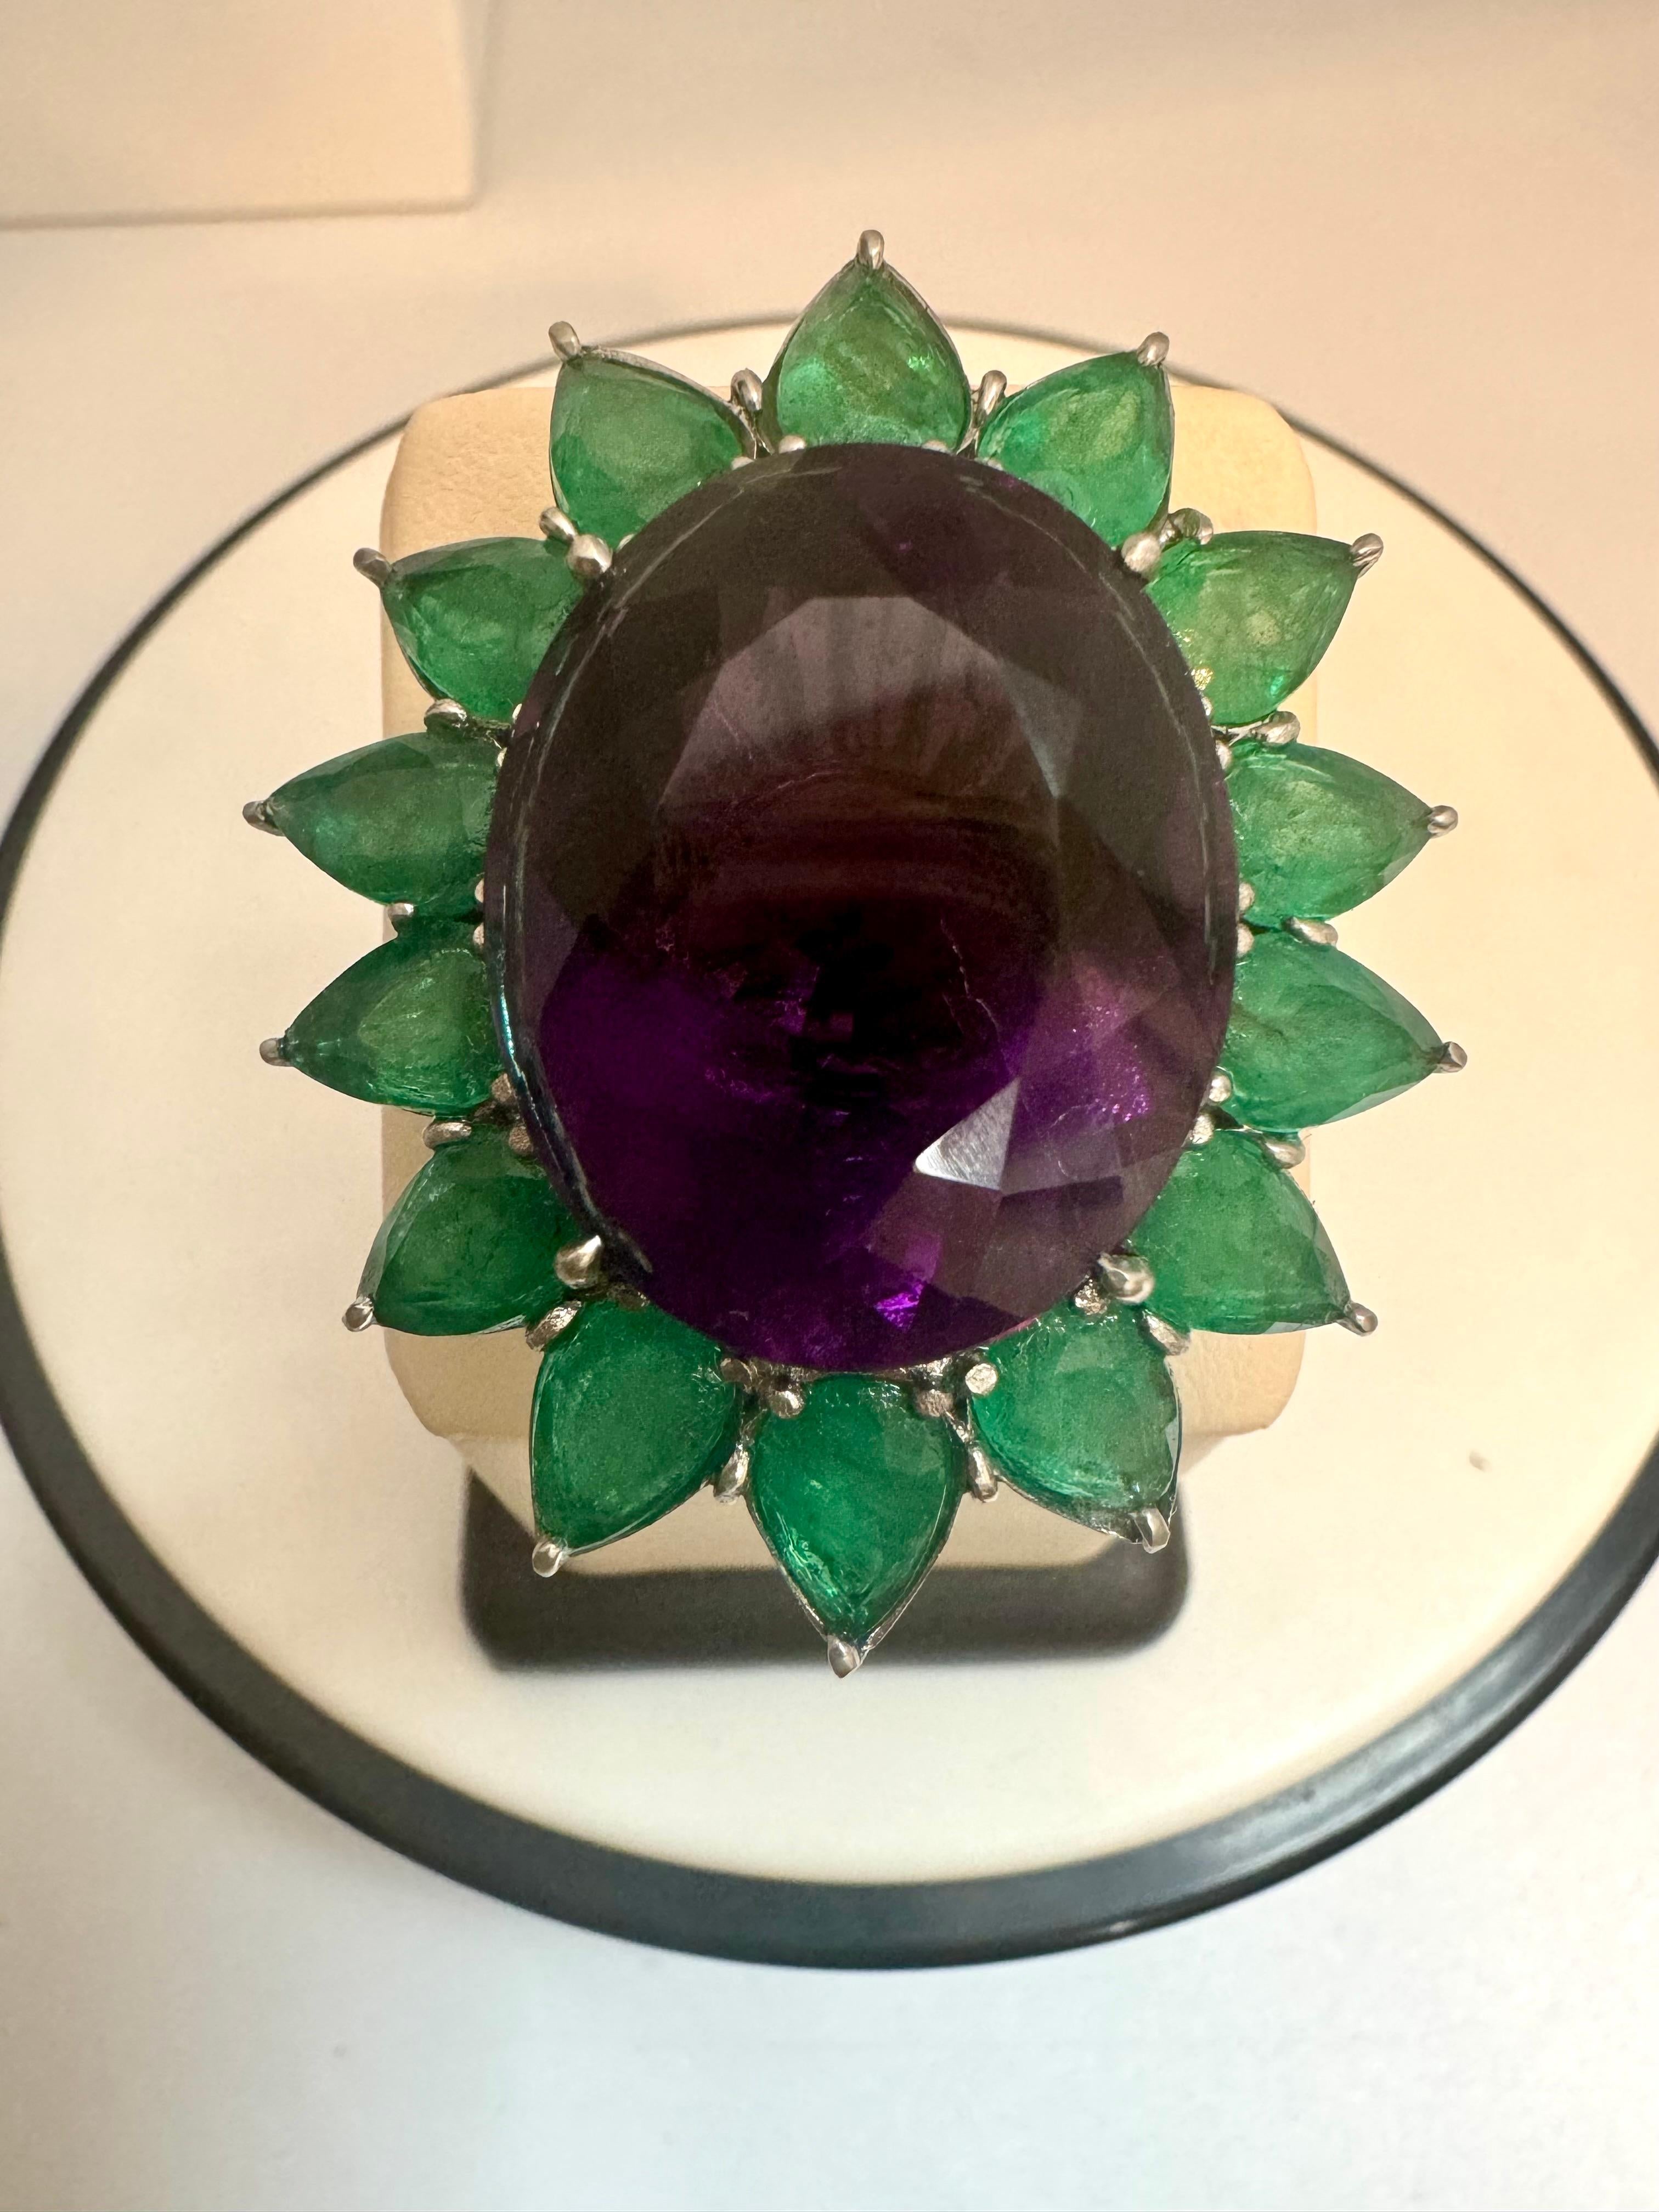 30 Ct Oval Amethyst & 25 Ct Emerald Large Cocktail Ring in Platinum, 32gm, Size6 For Sale 11